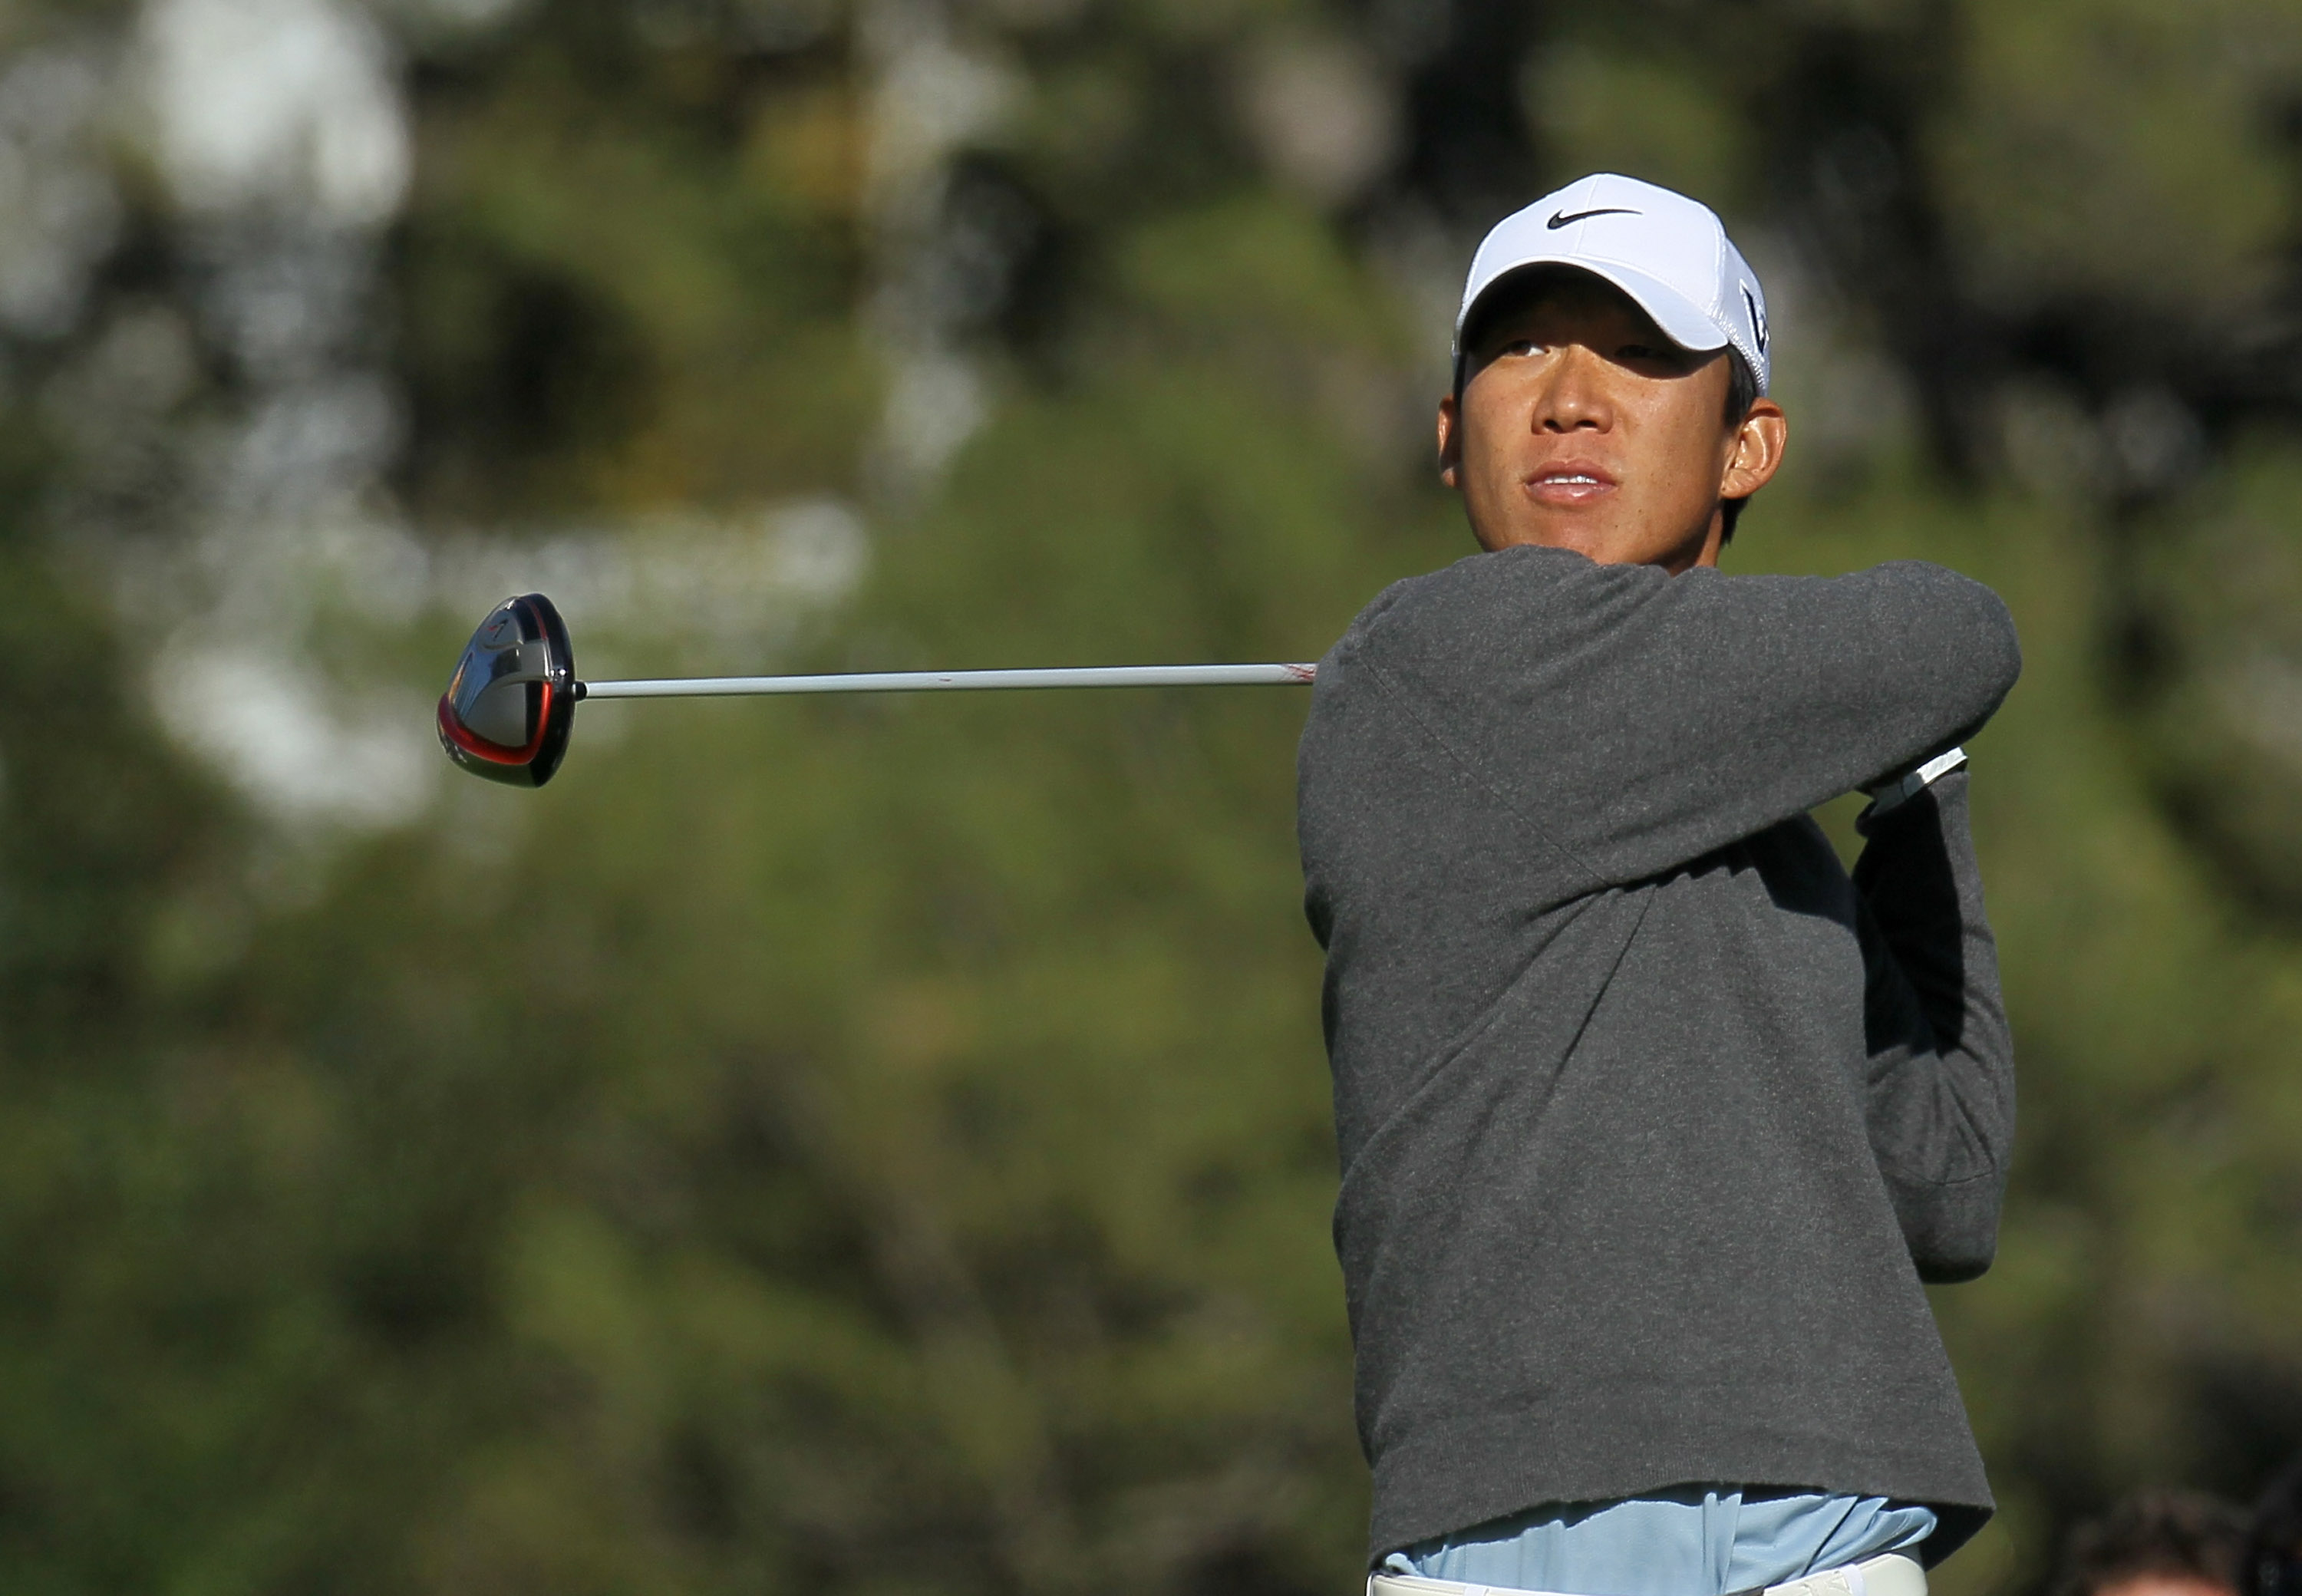 PACIFIC PALISADES, CA - FEBRUARY 17:  Anthony Kim hits his tee shot on the fourth hole during round one of the Northern Trust Open at Riviera Counrty Club on February 17, 2011 in Pacific Palisades, California.  (Photo by Stephen Dunn/Getty Images)